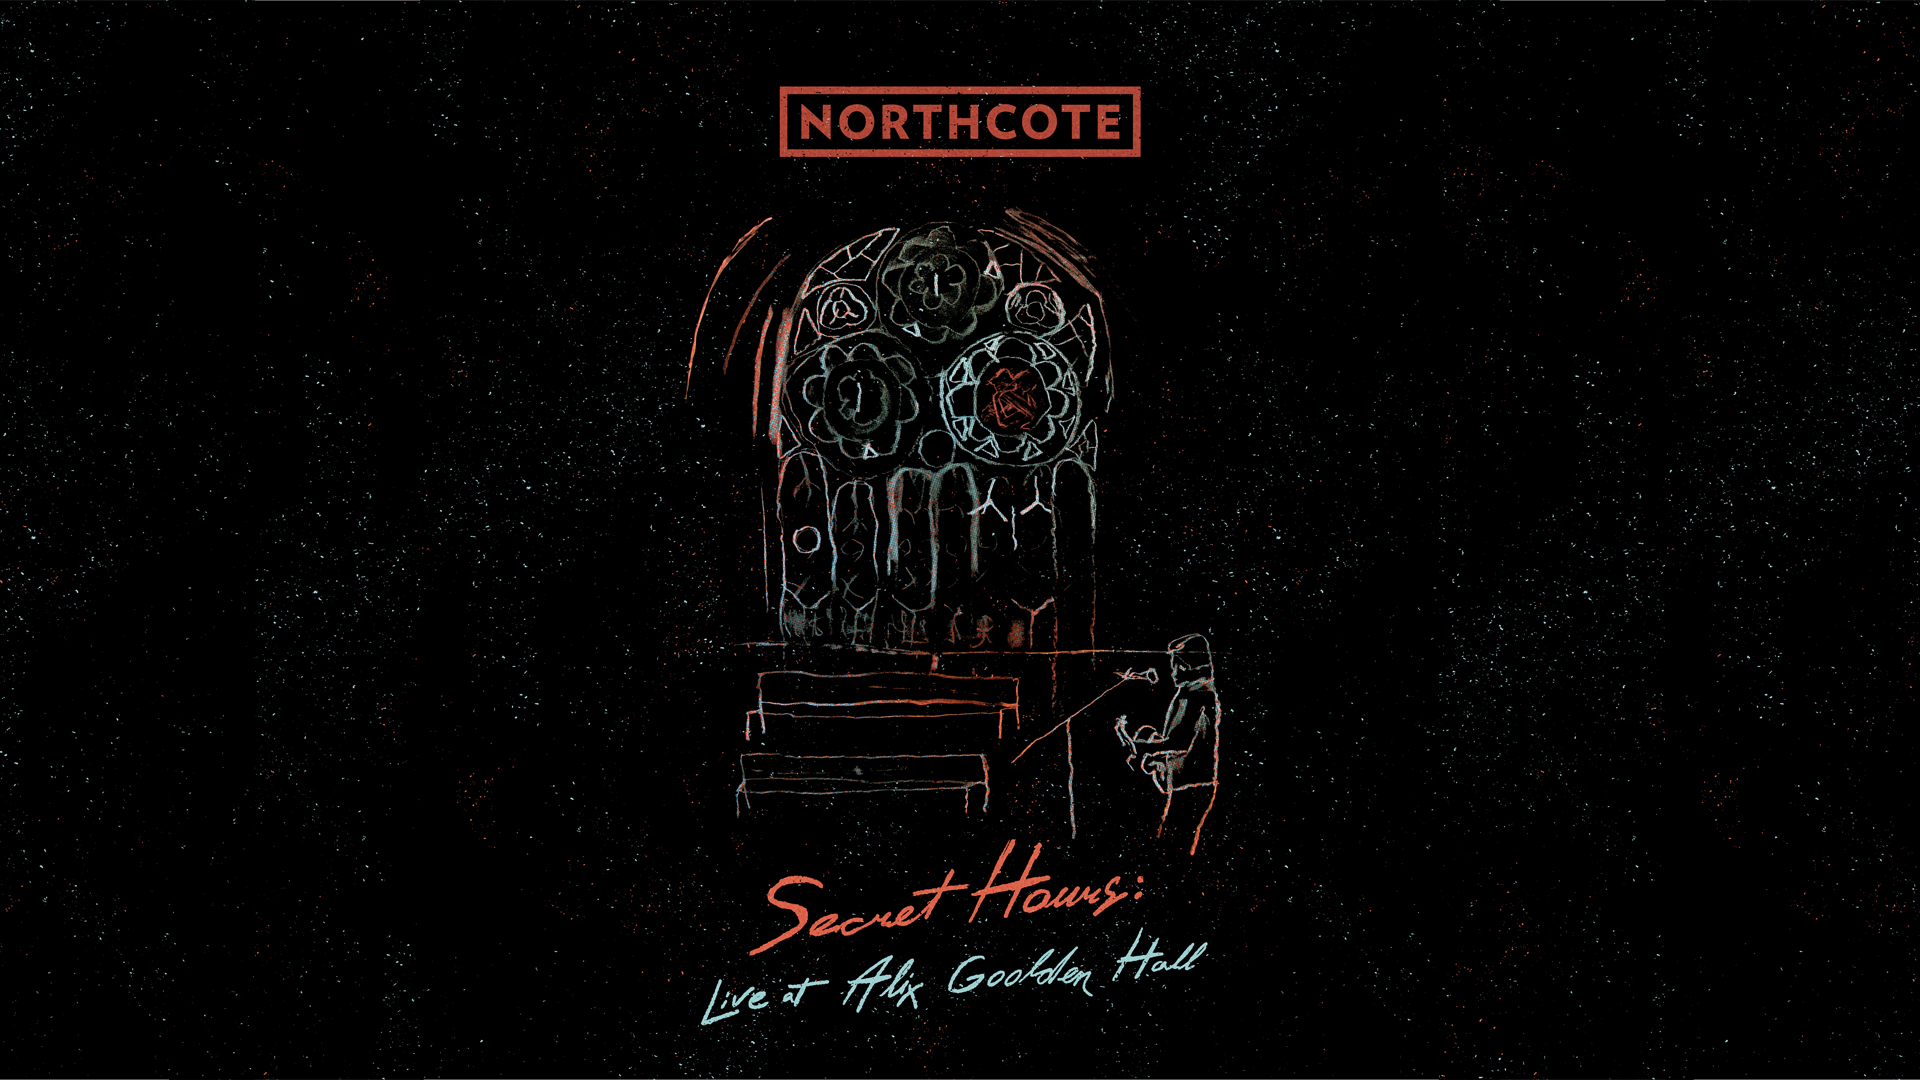 Photo for Northcote - Secret Hours (Virtual Concert Live at Alix Goolden Hall) on ViewStub